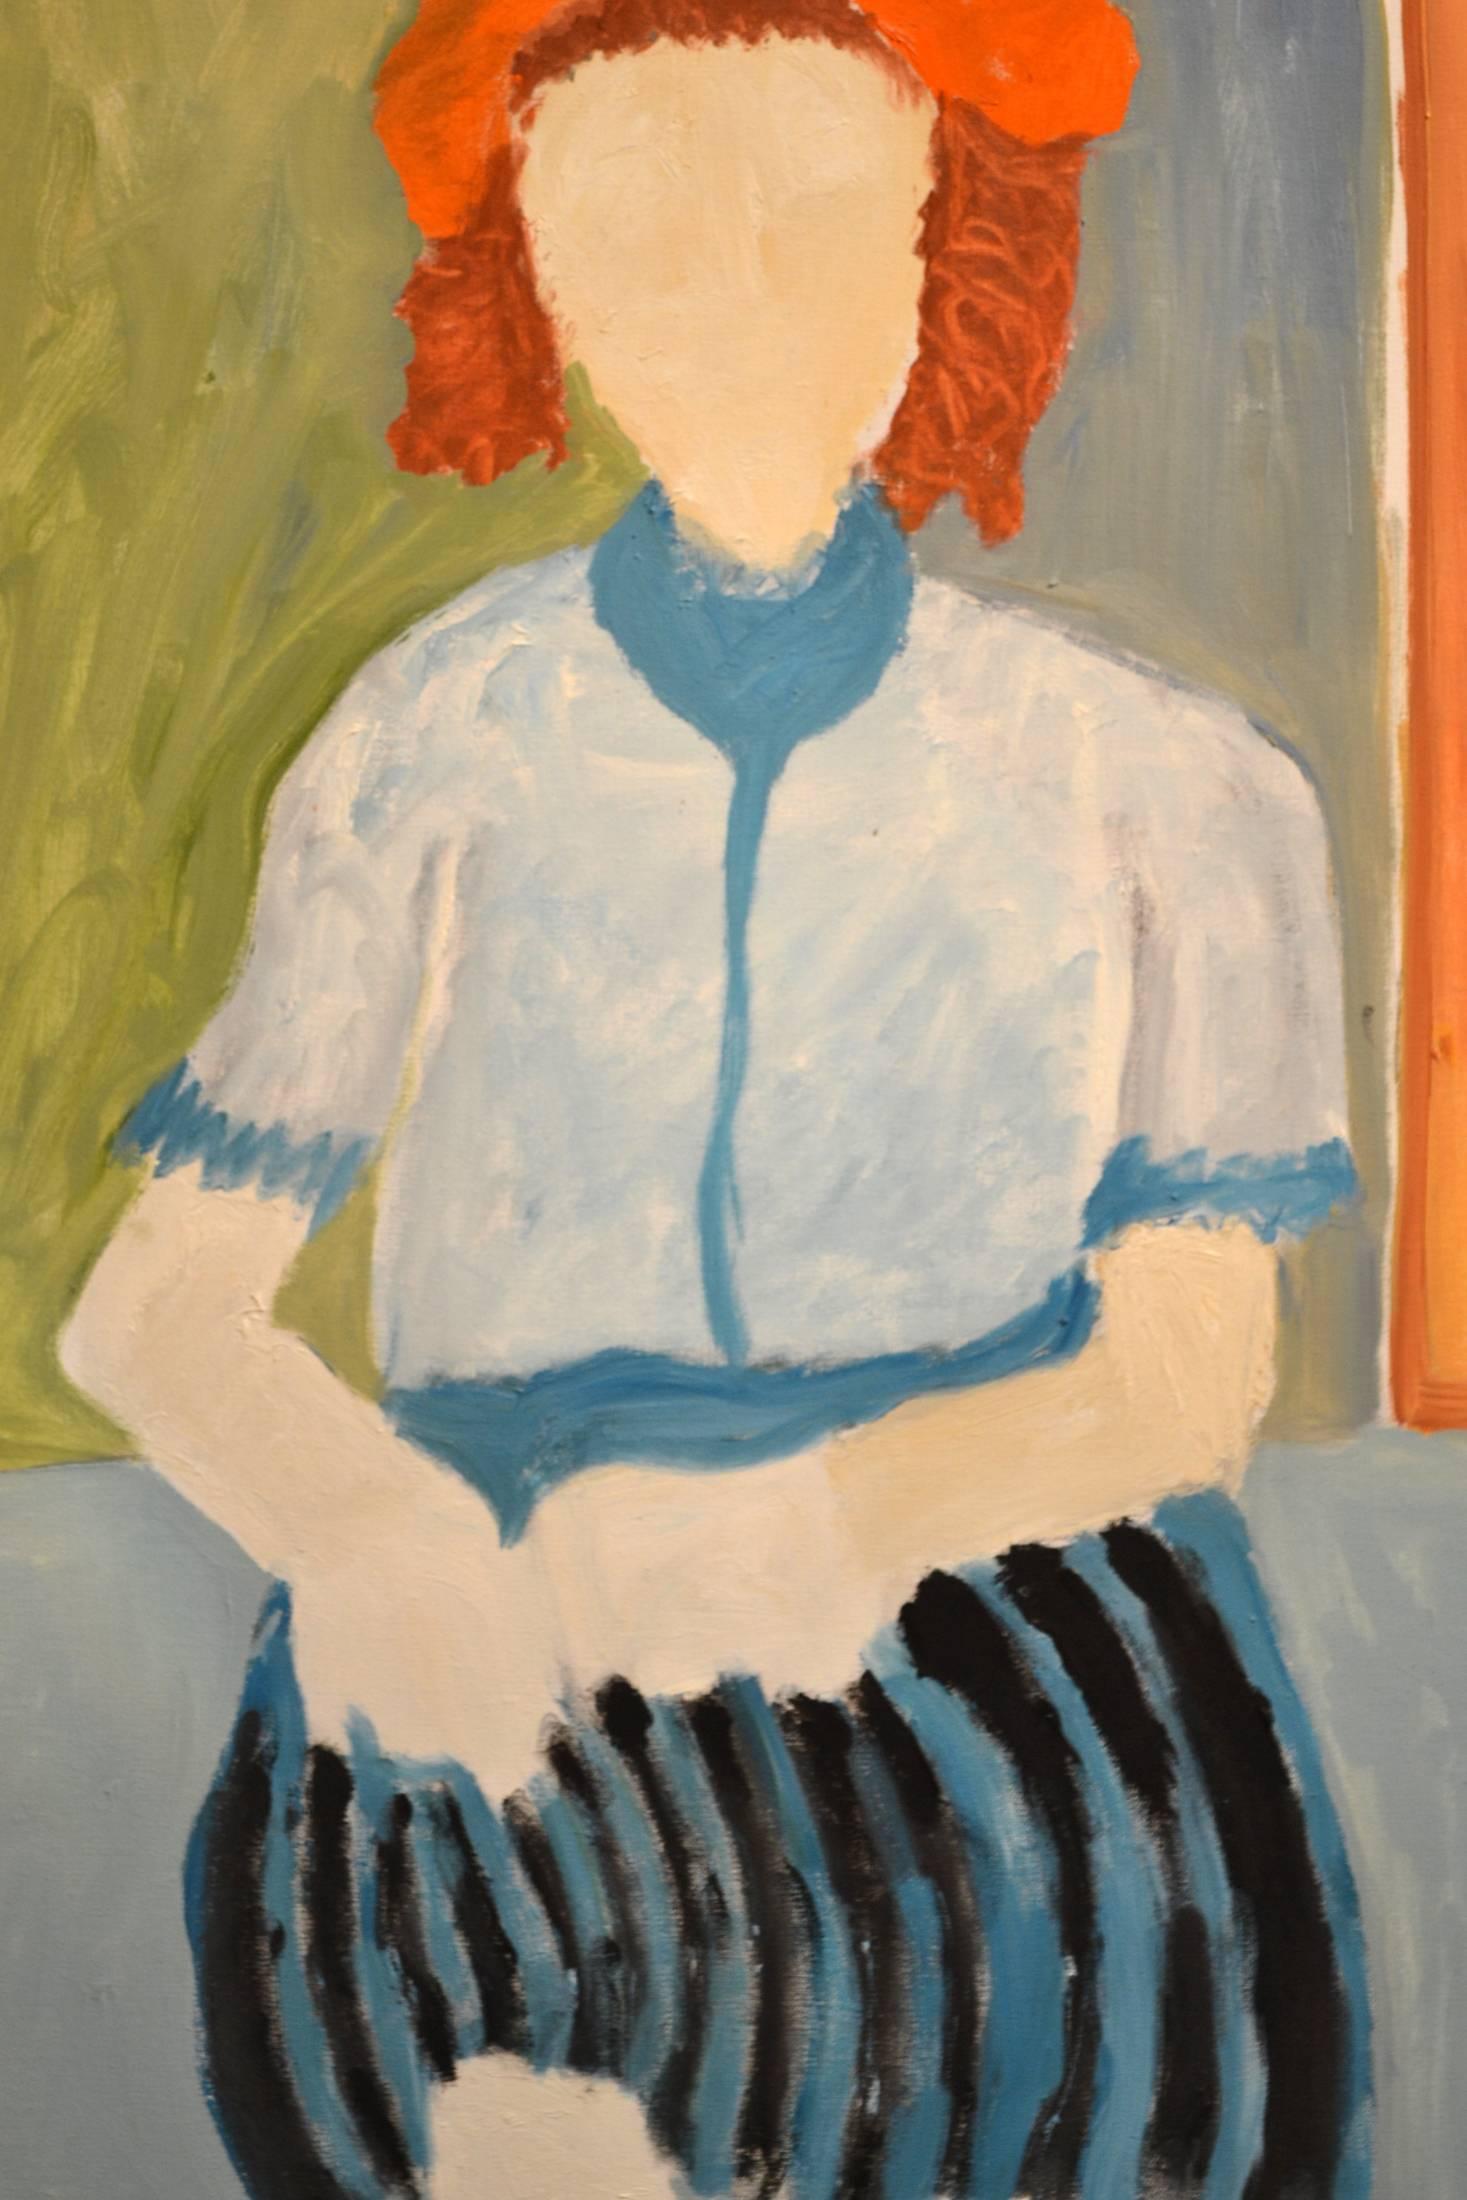 This exceptional painting titled Expressionist Portrait of Woman in Striped Skirt is by highly listed and respected self-taught artist JoAnne Fleming (b. 1930). The artist's characteristic style exudes a primitive quality to each and every work of